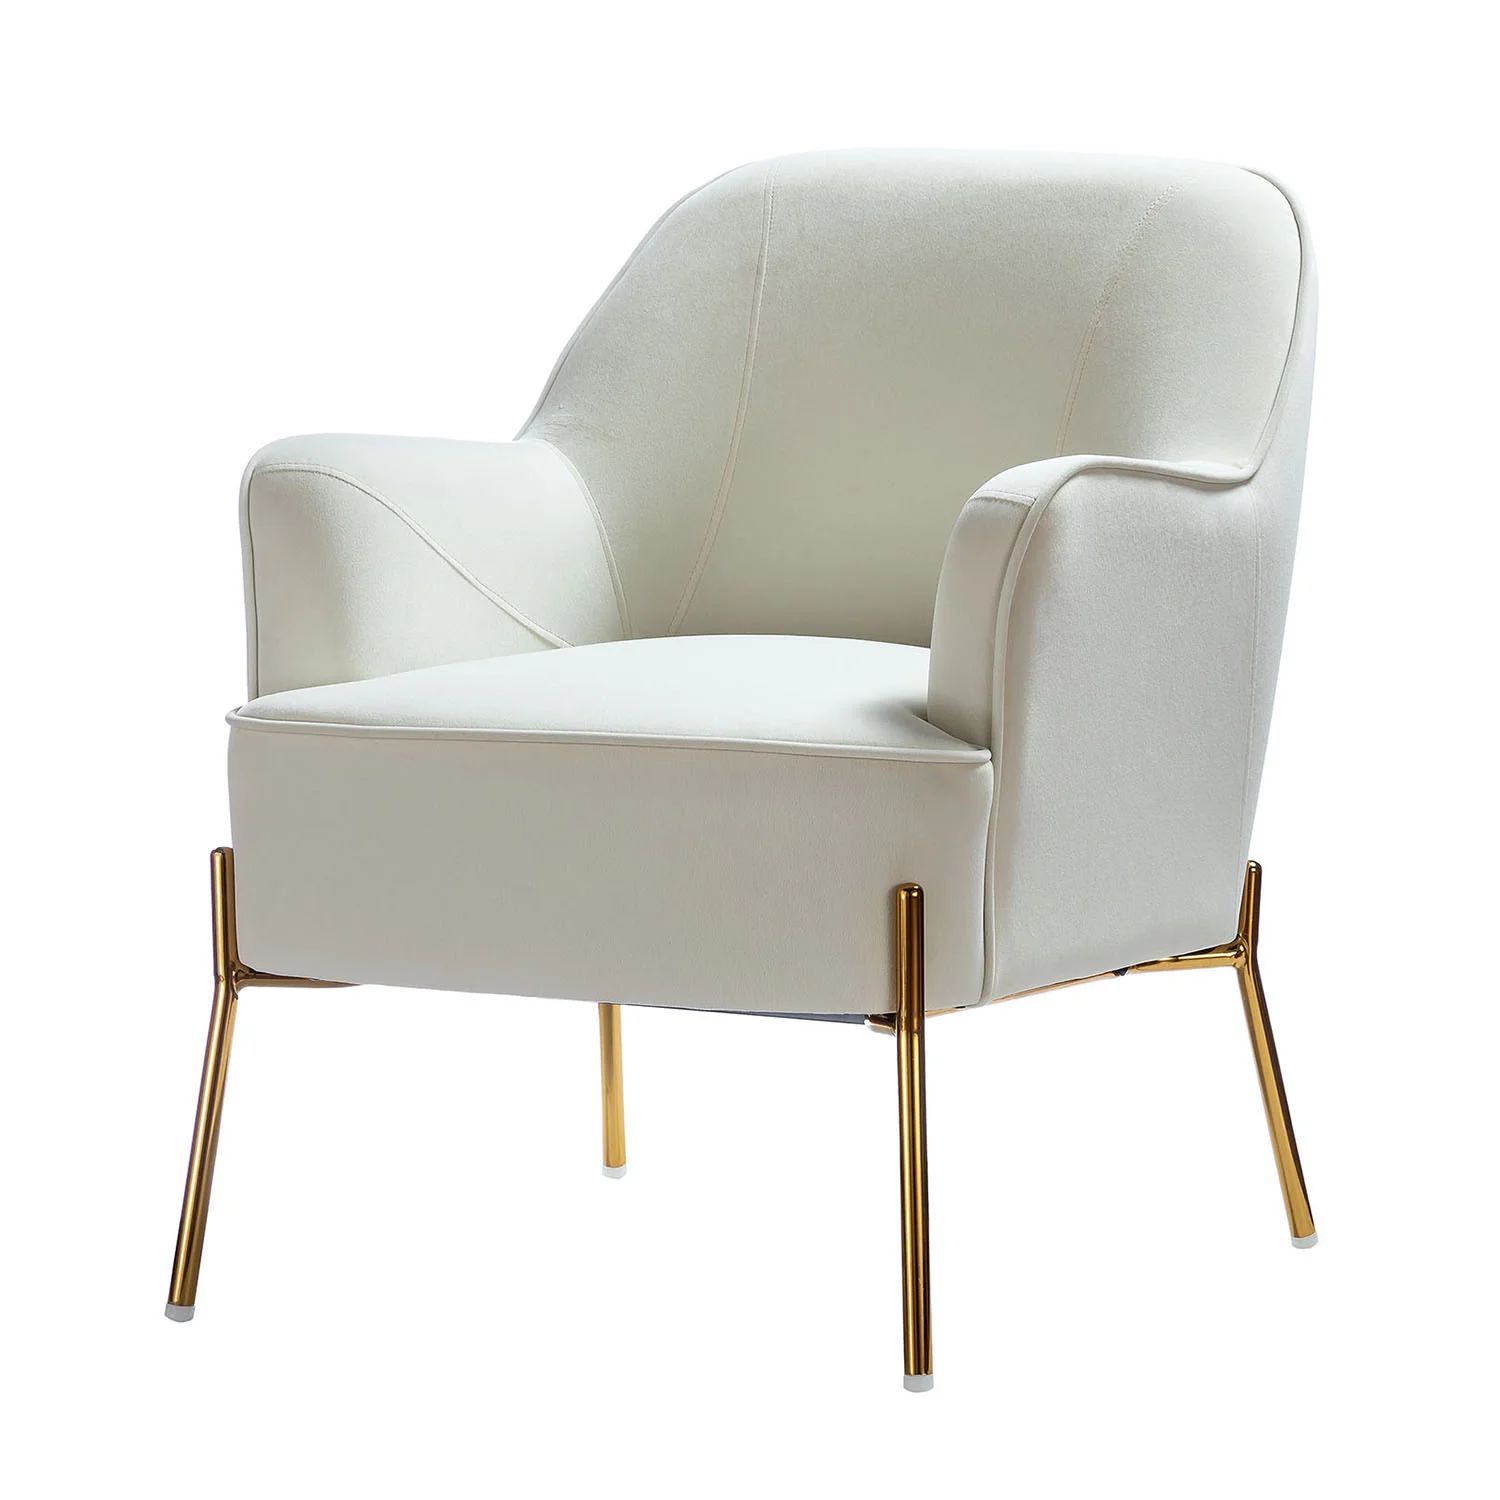 Cleo 26" Wide Contemporary Chair with Recessed Arms | Wayfair North America